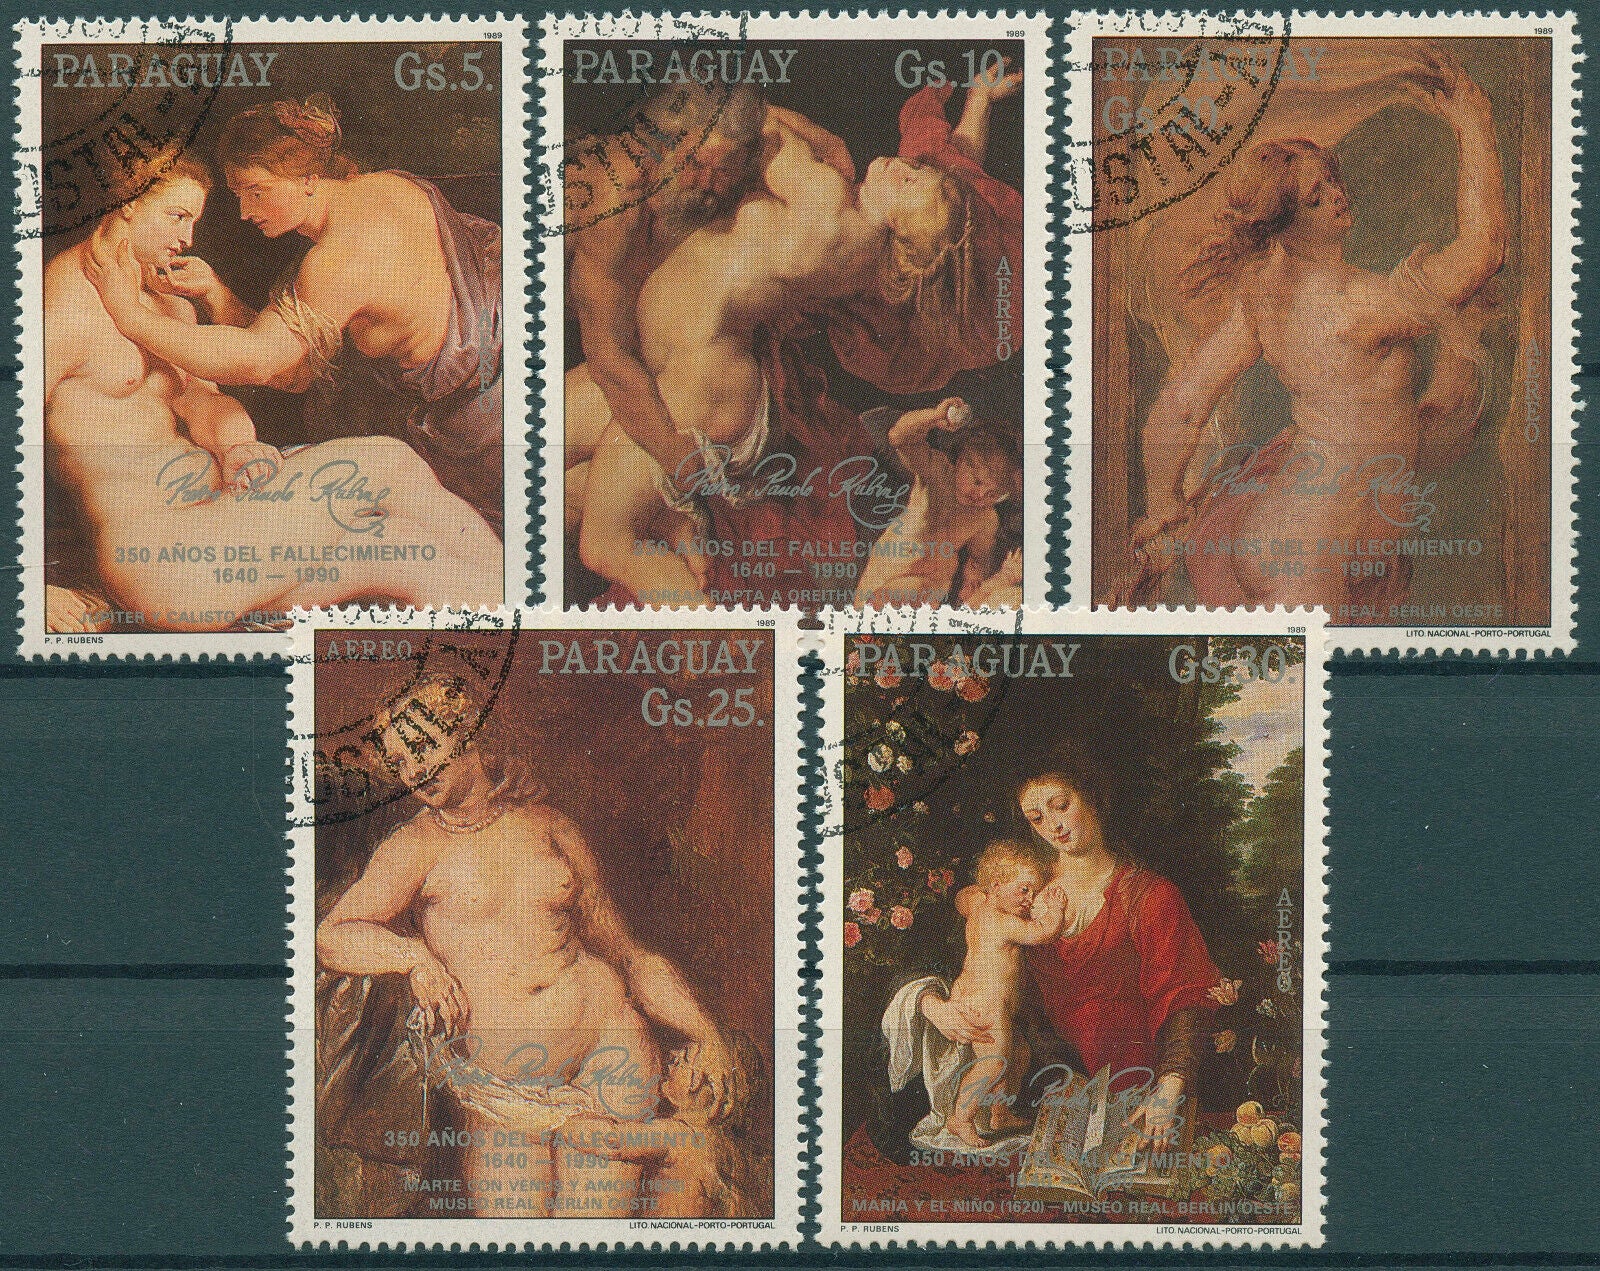 Paraguay 1989 CTO Art Stamps Peter Paul Rubens Nudes Nude Paintings 5v Set I